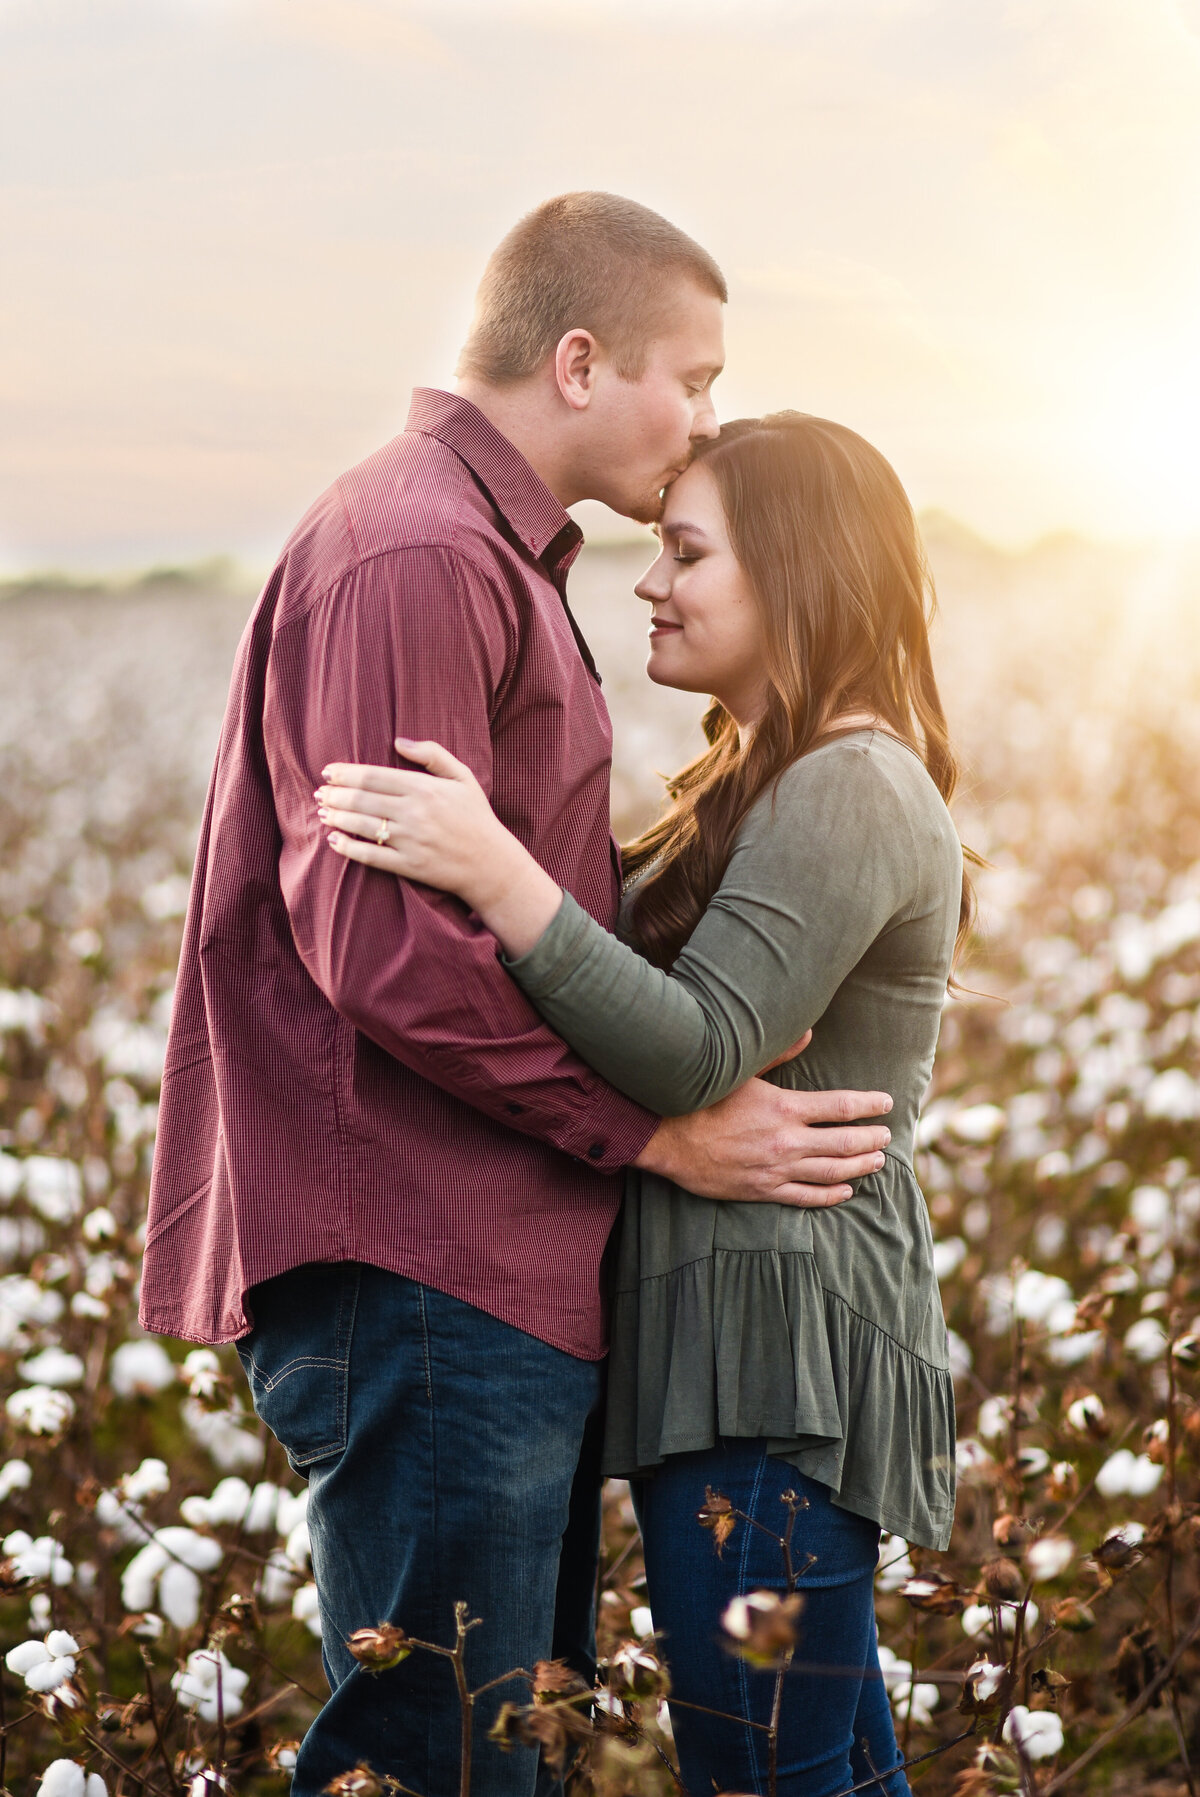 Beautiful Mississippi Engagement Photography: couple embraces at sunset in a cotton field, Southern Wedding Photography